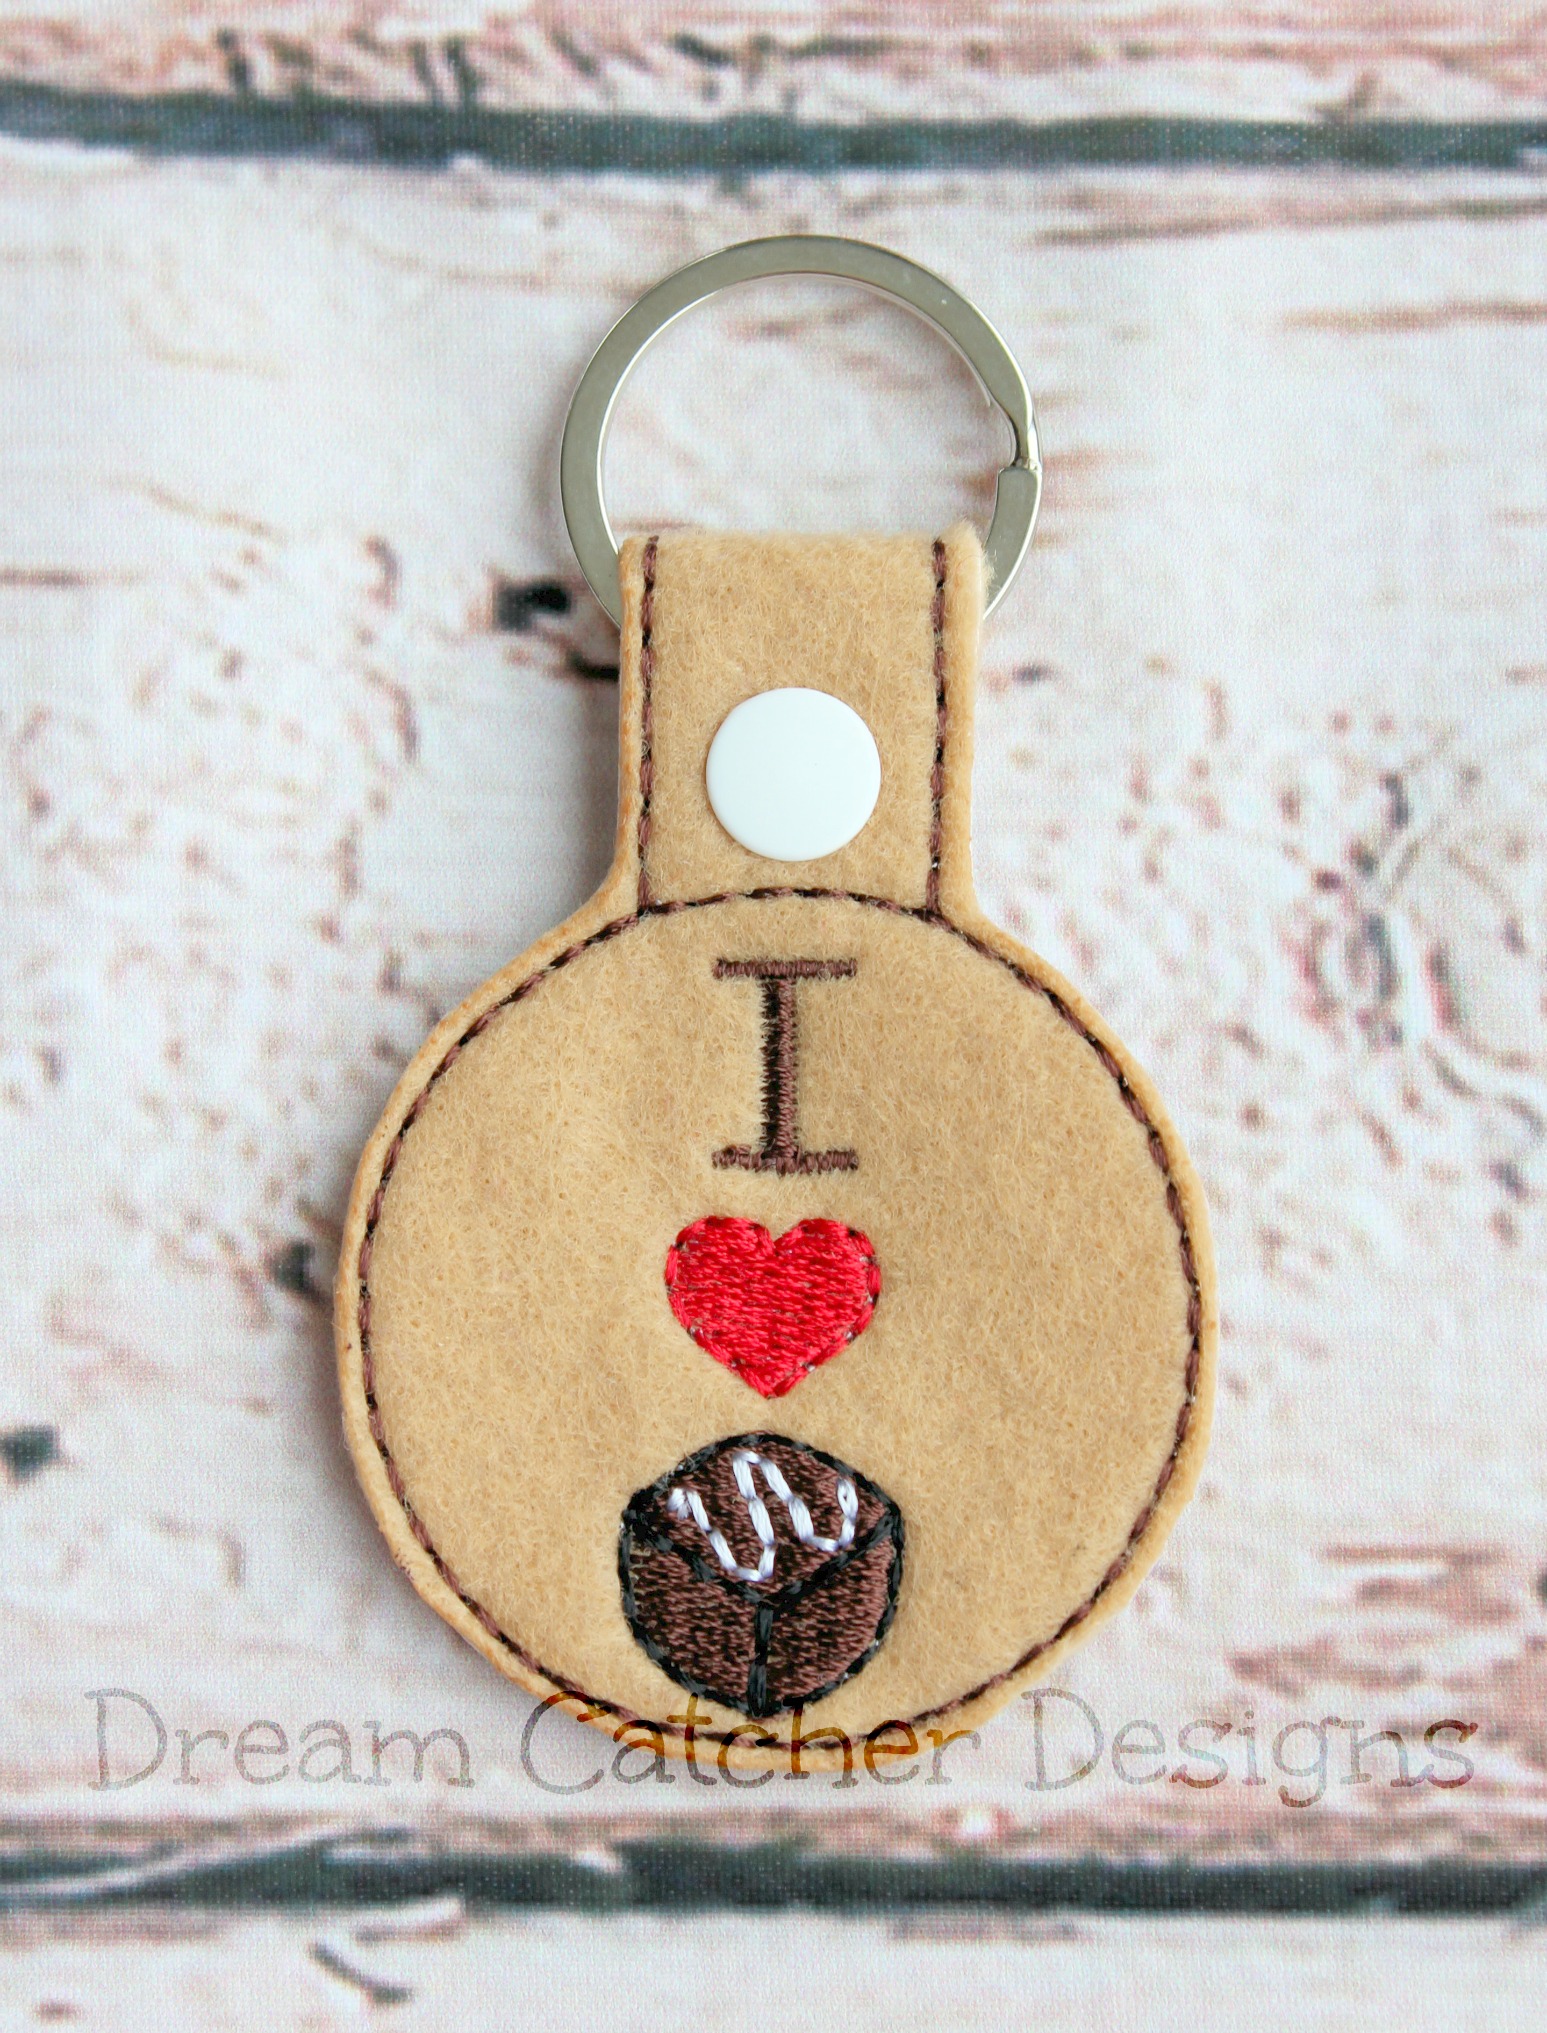 Key To Heart Embroidery Design